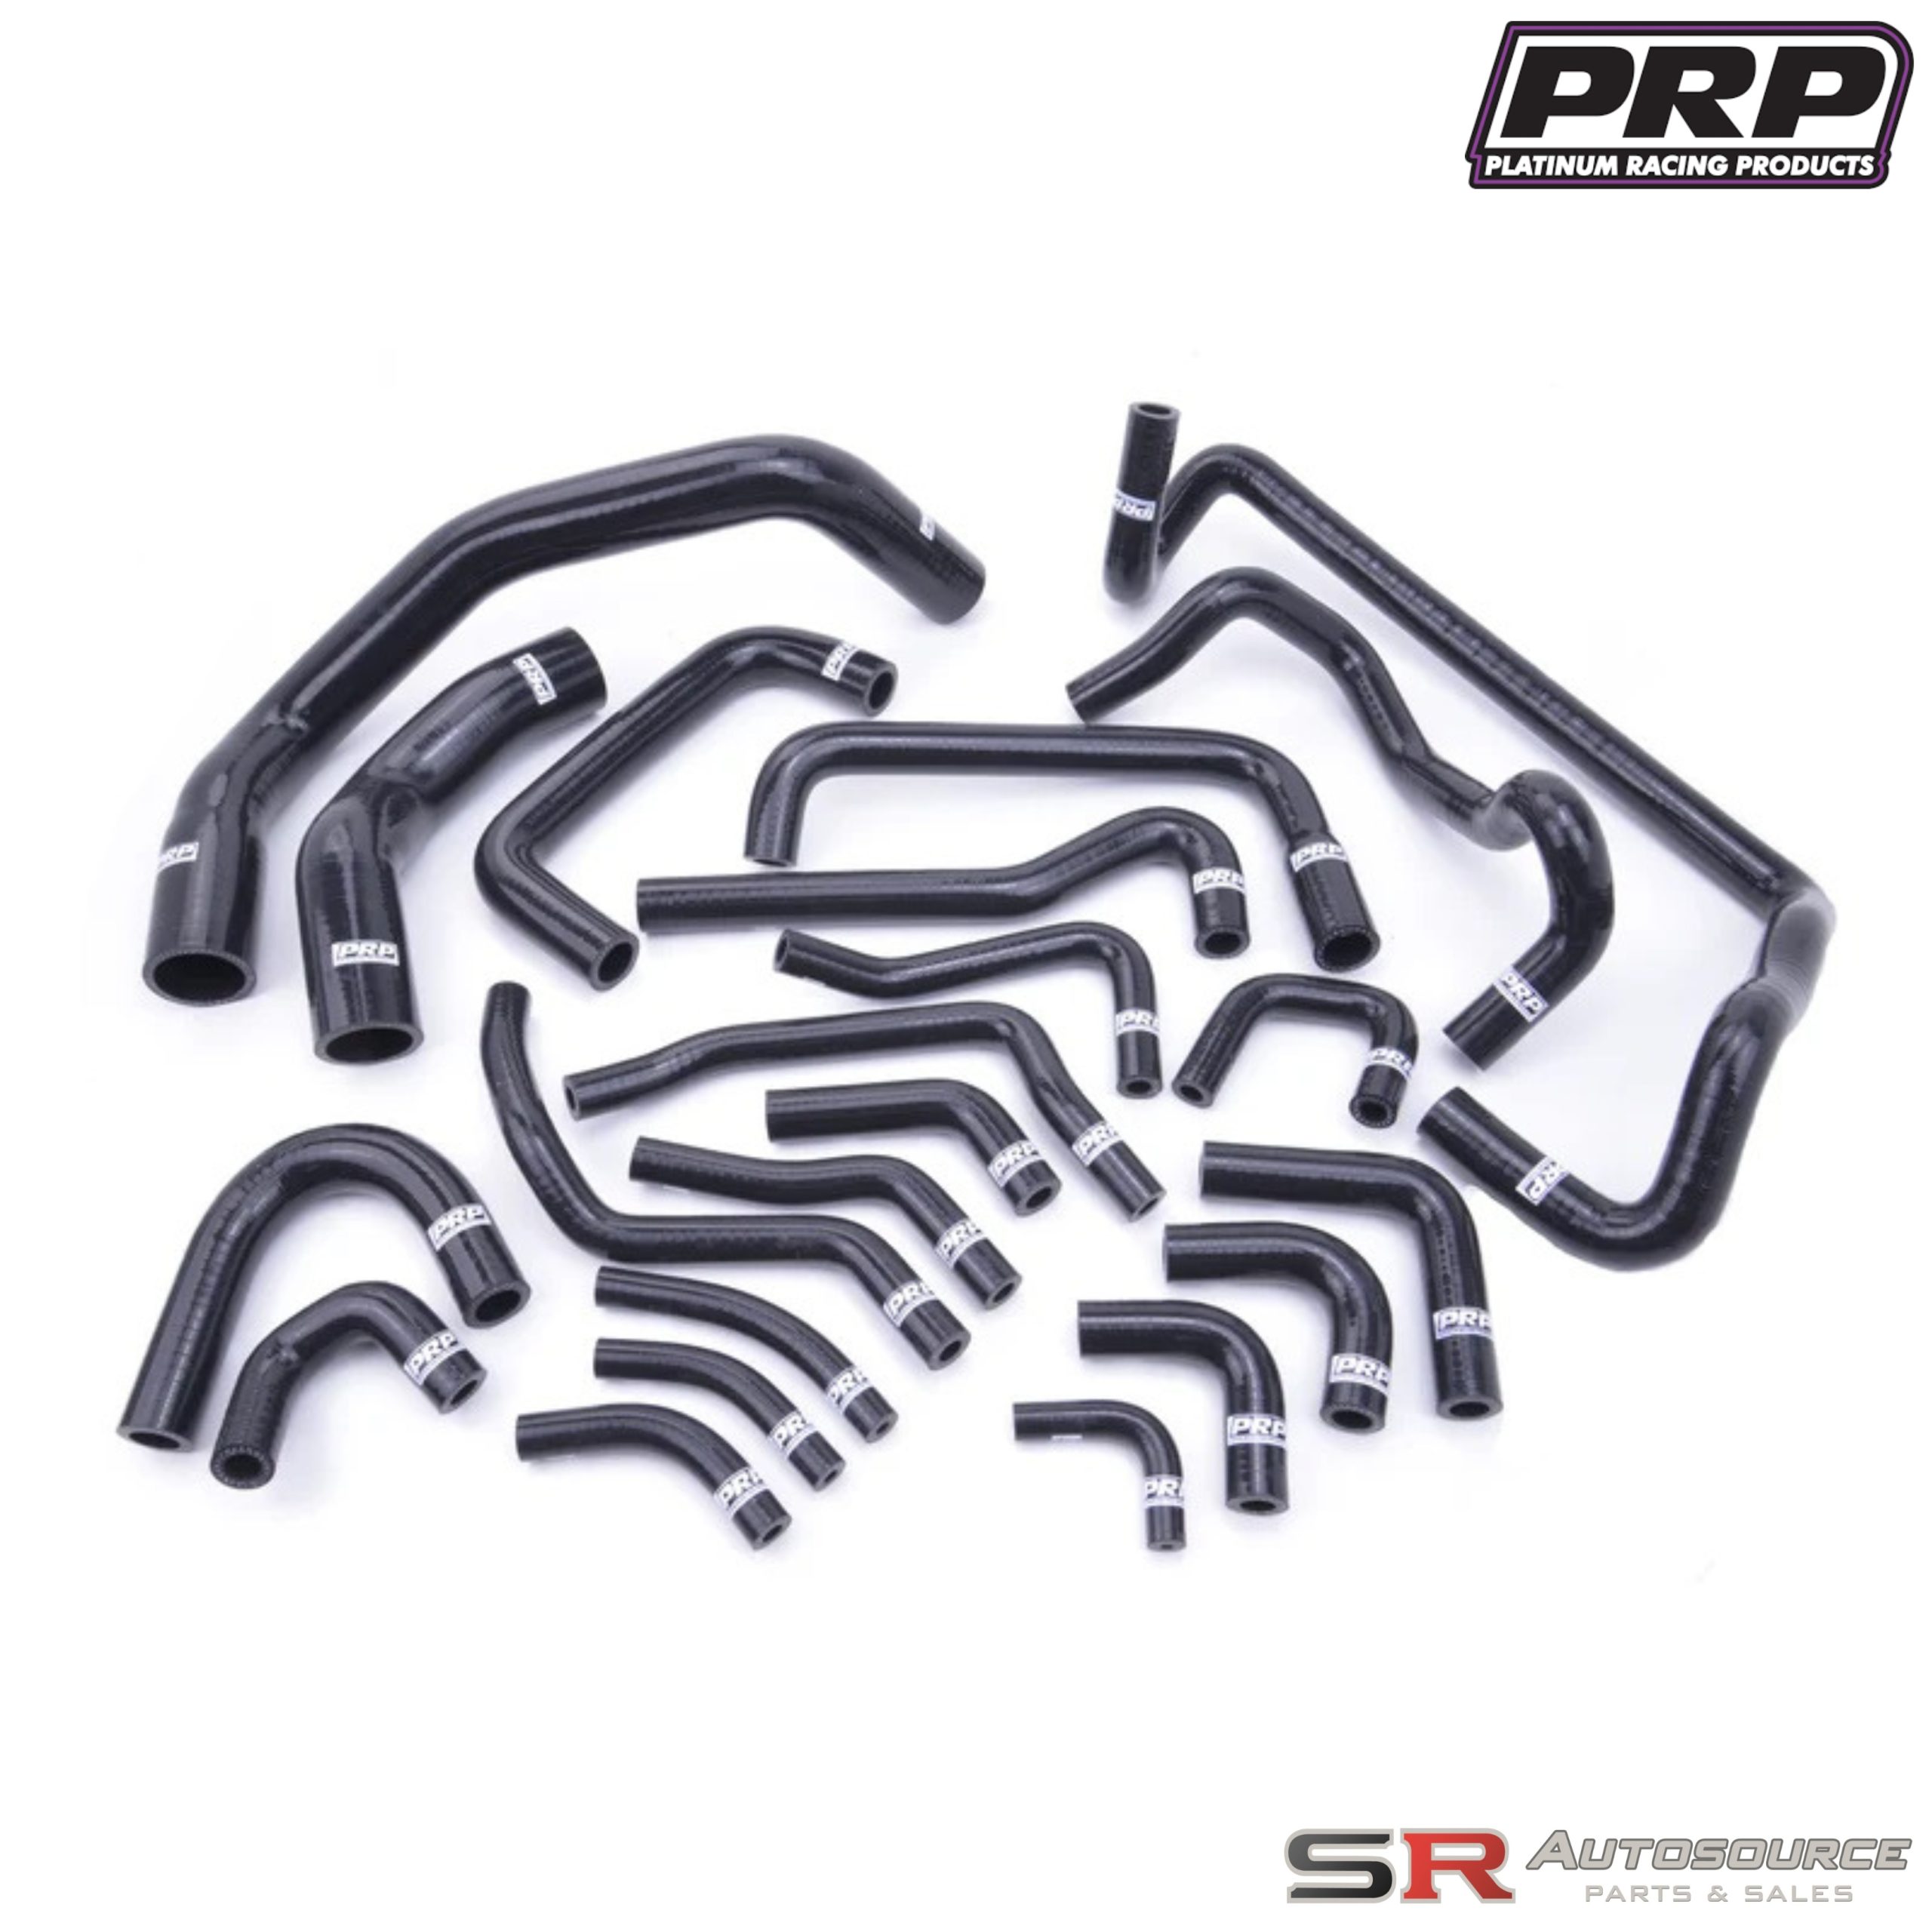 PRP Platinum Racing Products – R32 / R33 / R34 Complete Cooling System Silicone Hose Kit